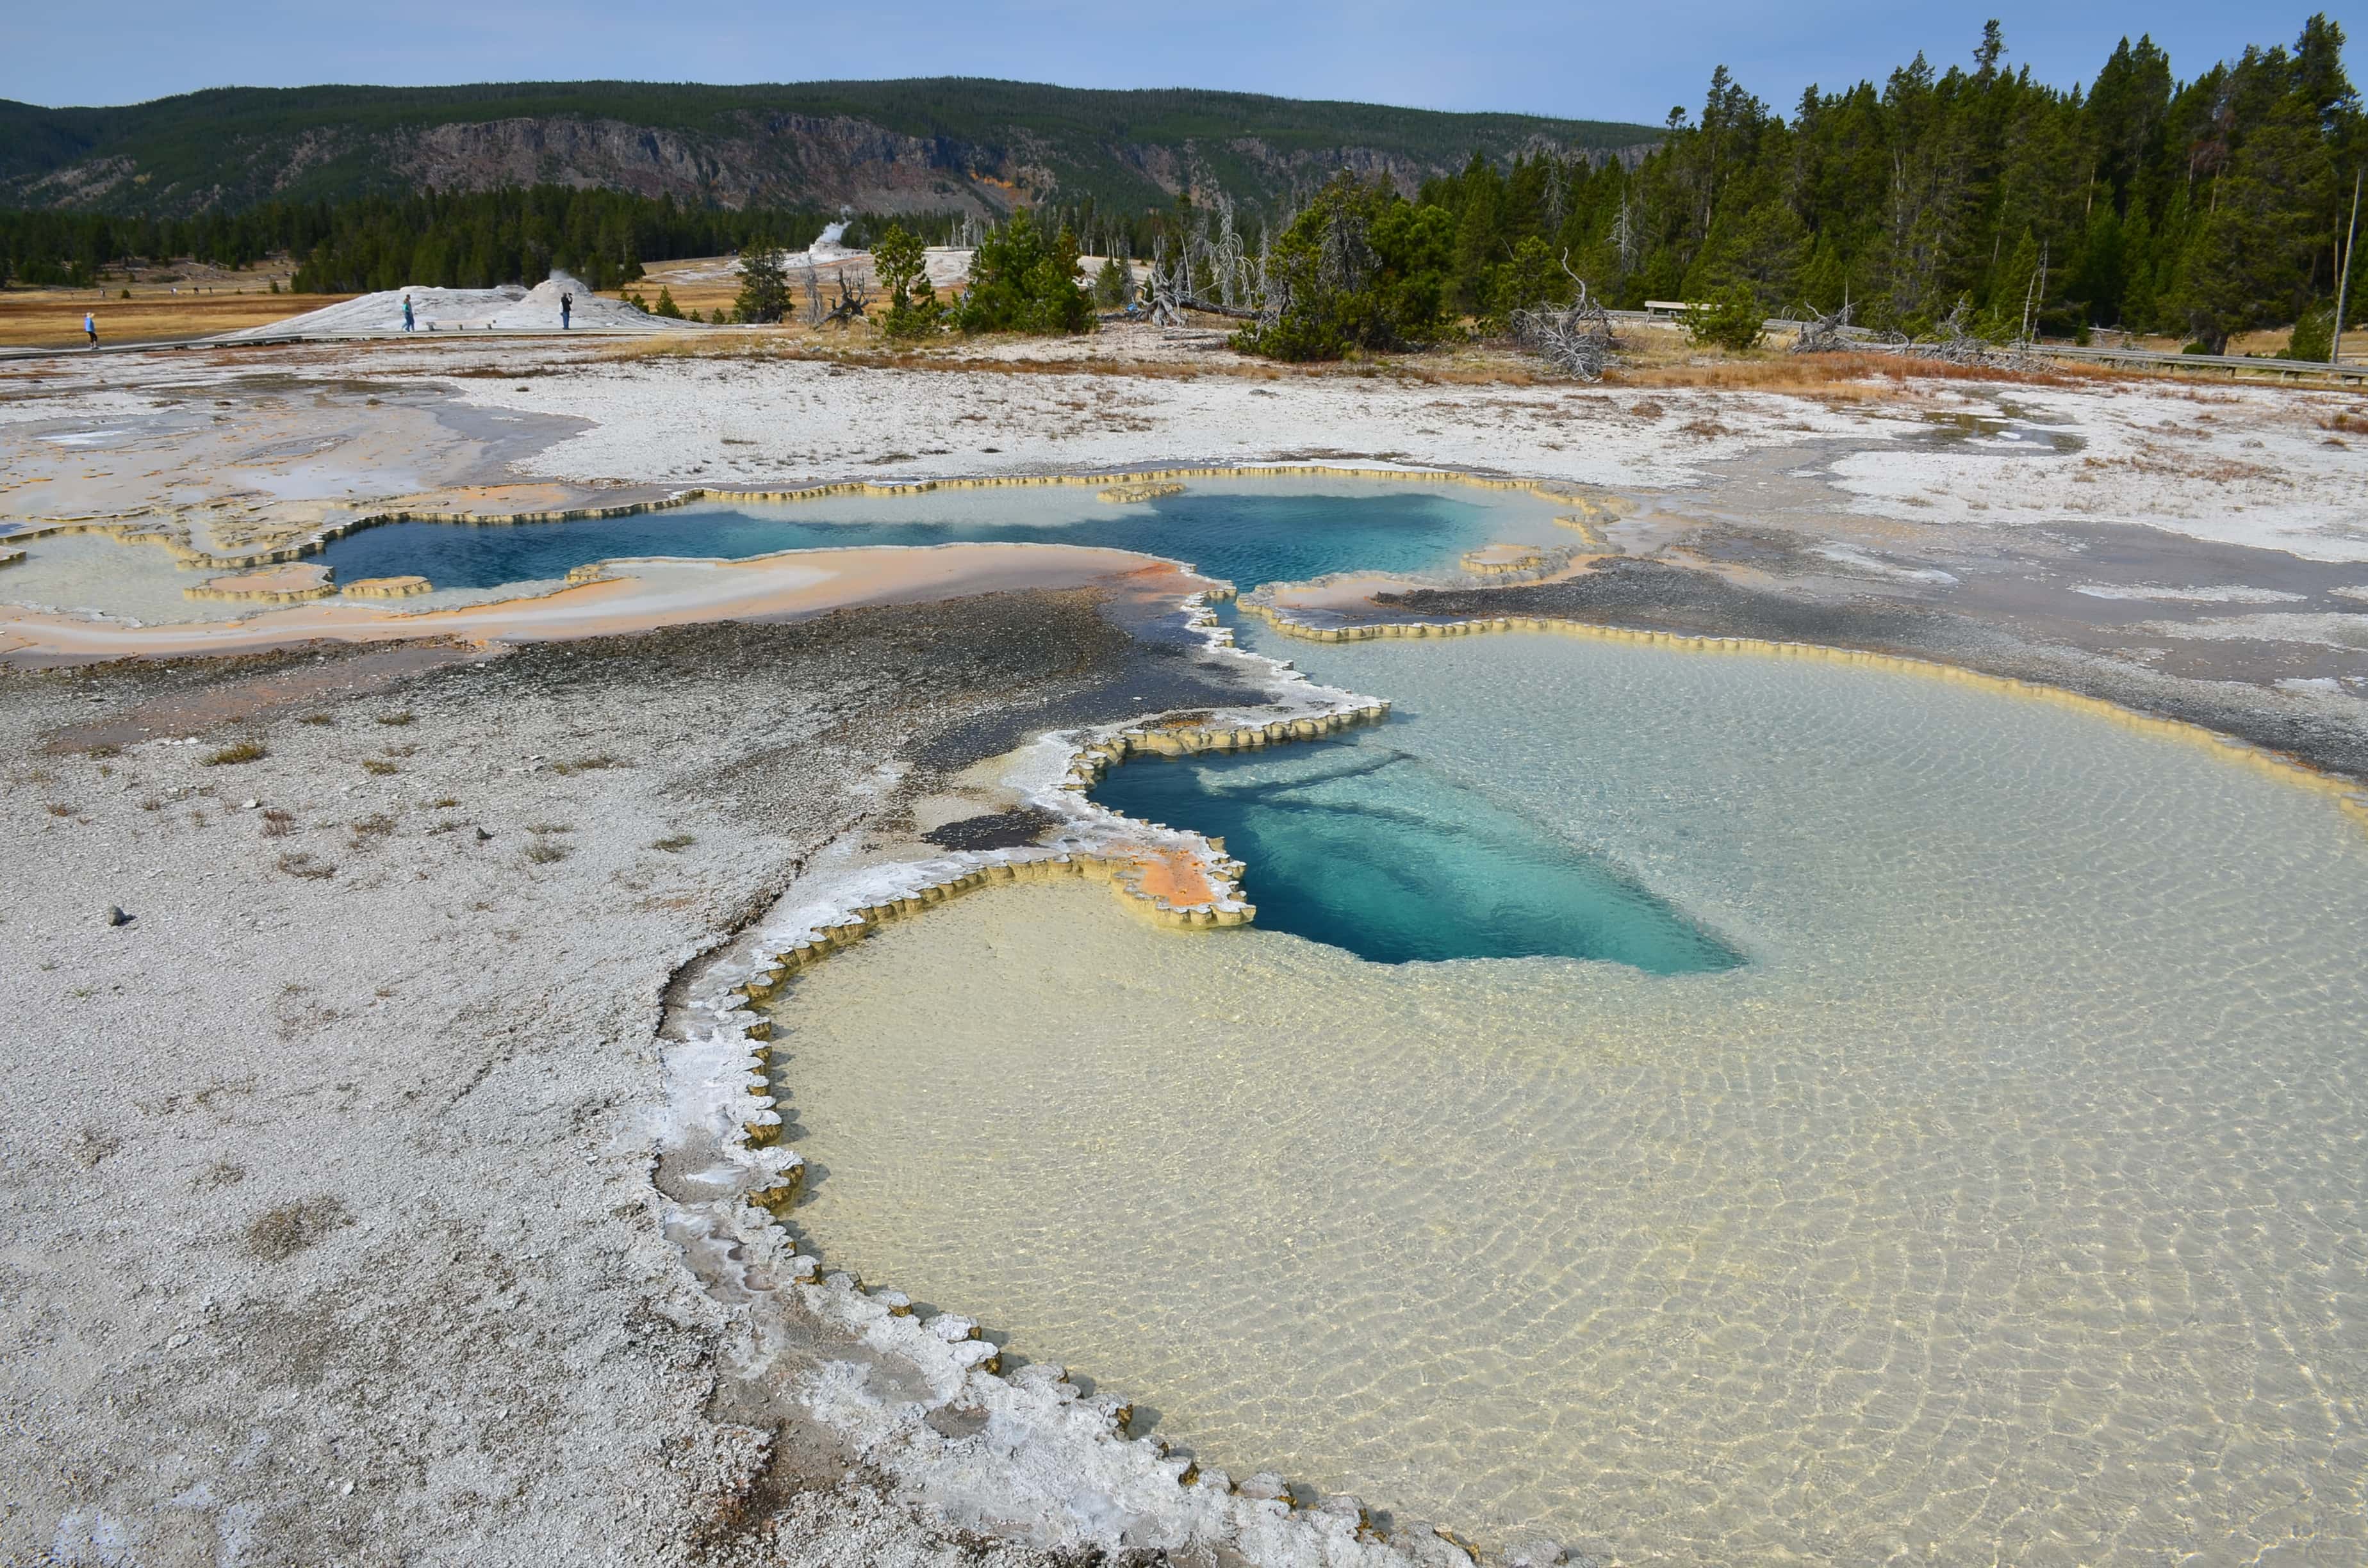 Doublet Pool on Geyser Hill at the Upper Geyser Basin in Yellowstone National Park, Wyoming